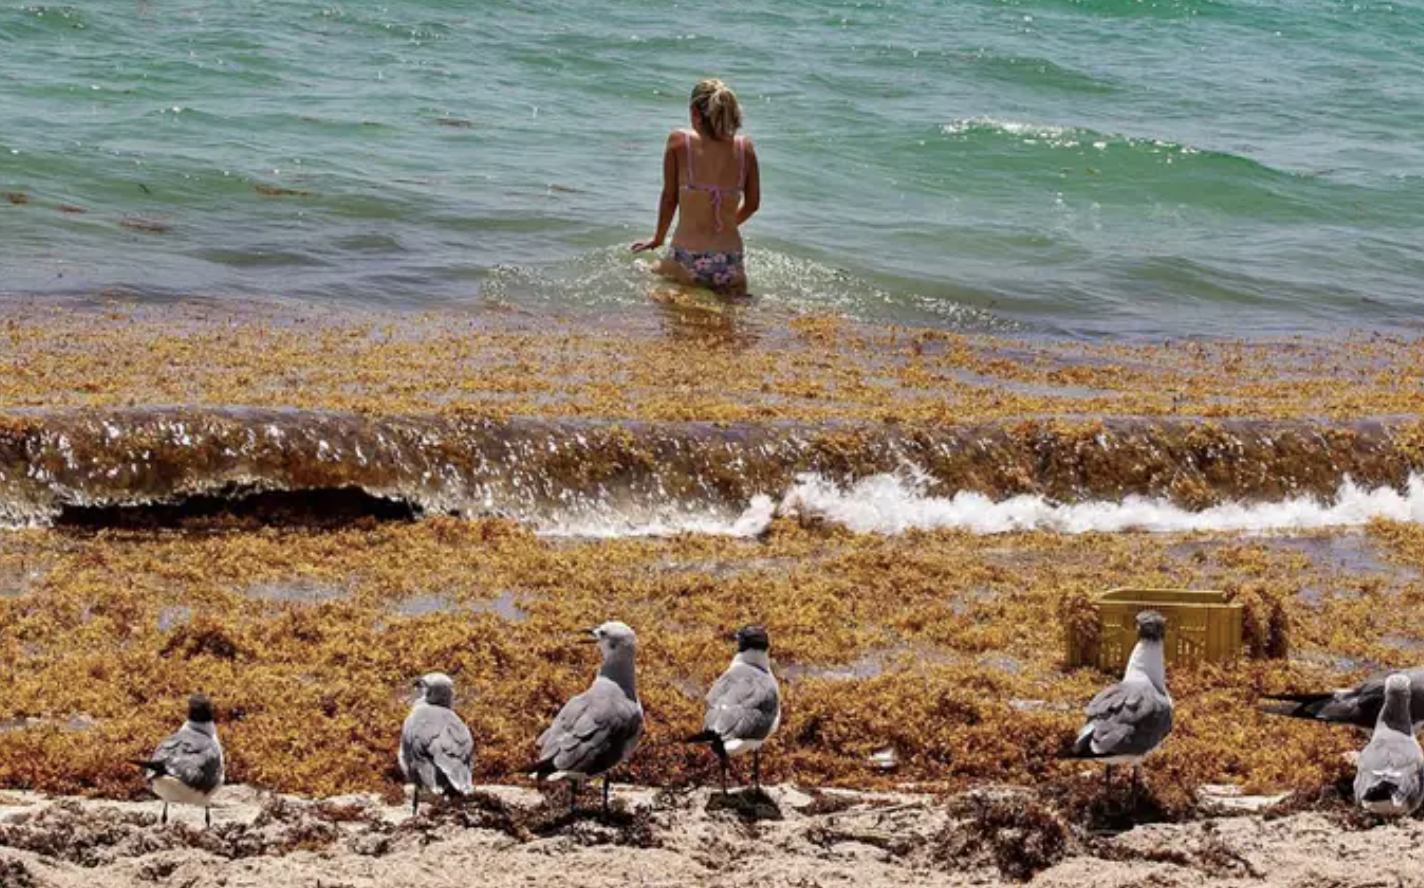 a woman swims at the beach but the water is filled with clumpy brown algae. also some seagulls are in the foreground